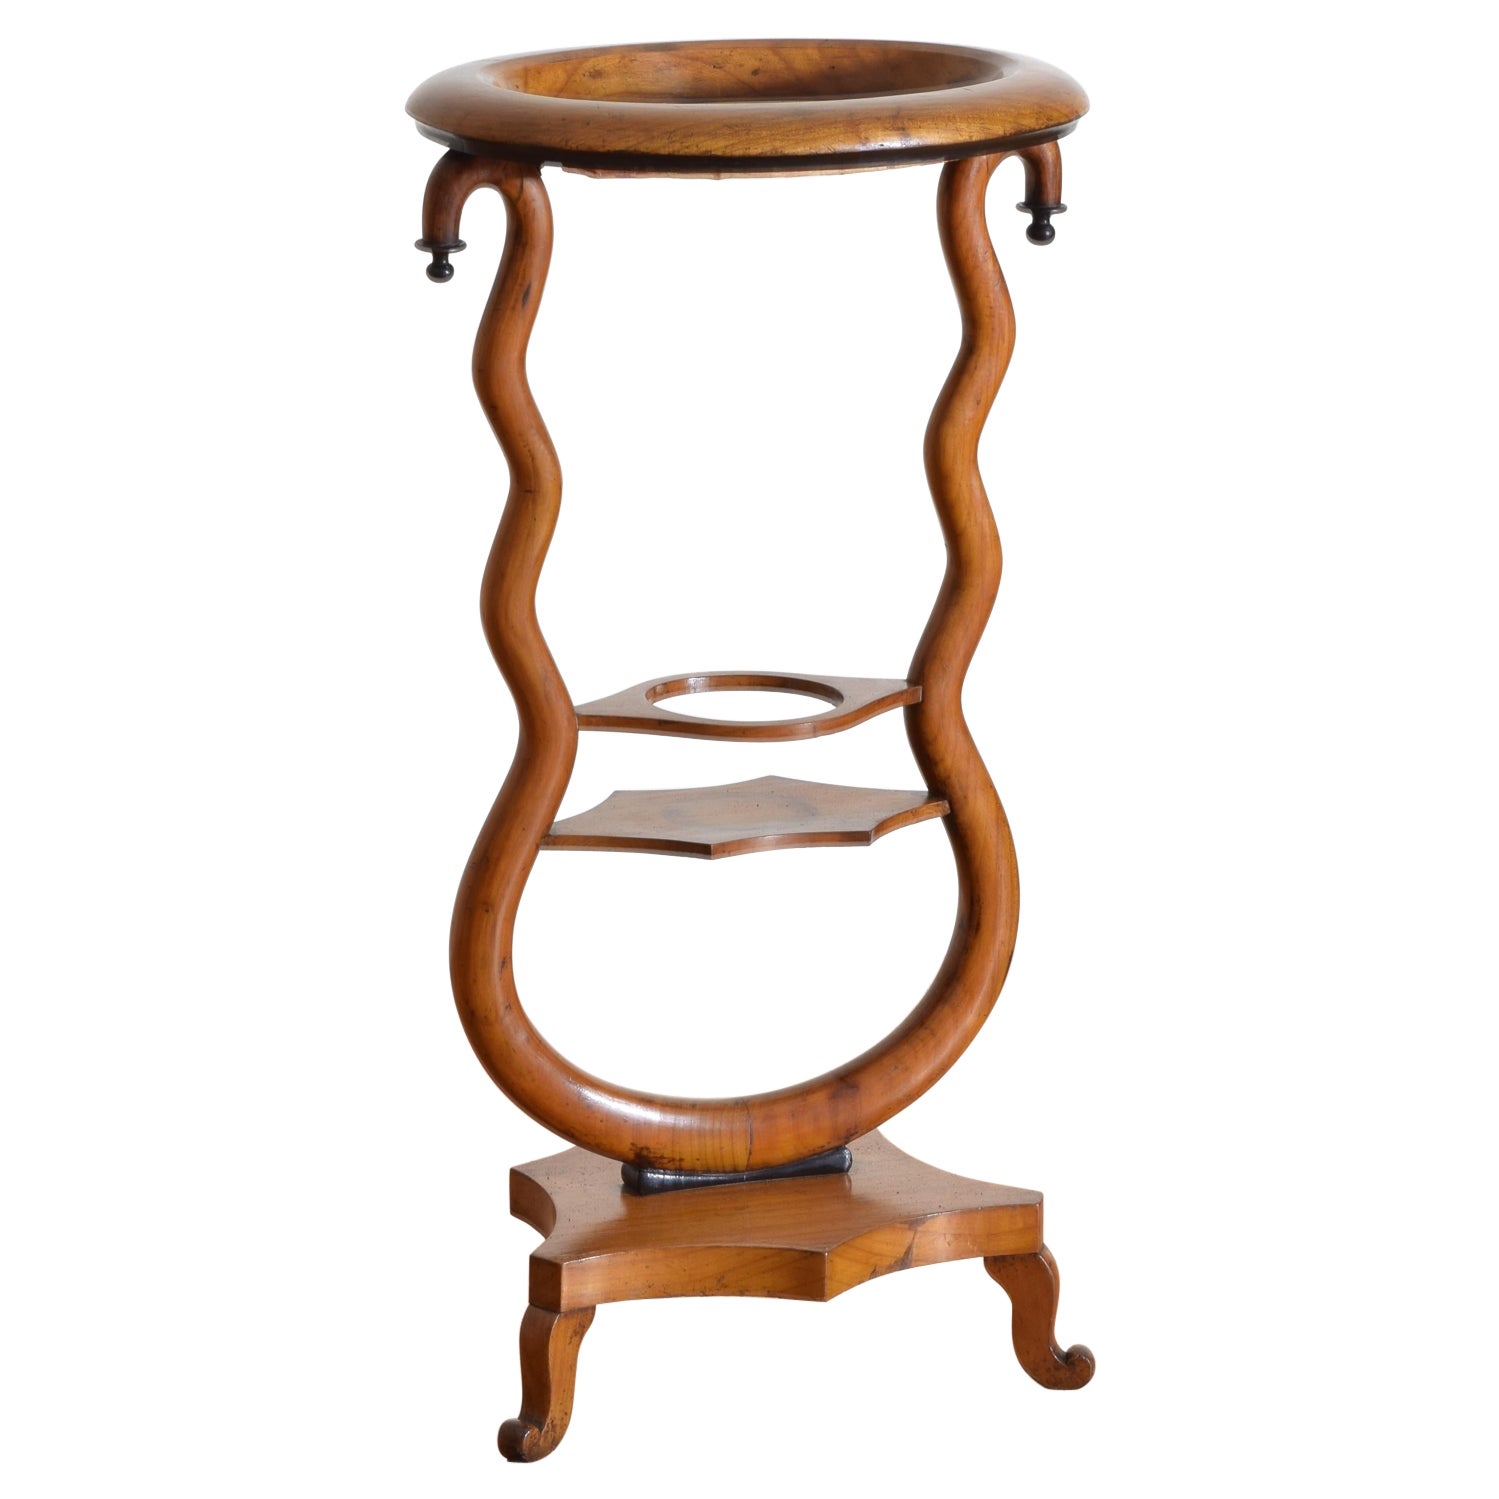 Charles X Period Maple Wood and Marble Inset Side Table, ca. 1825